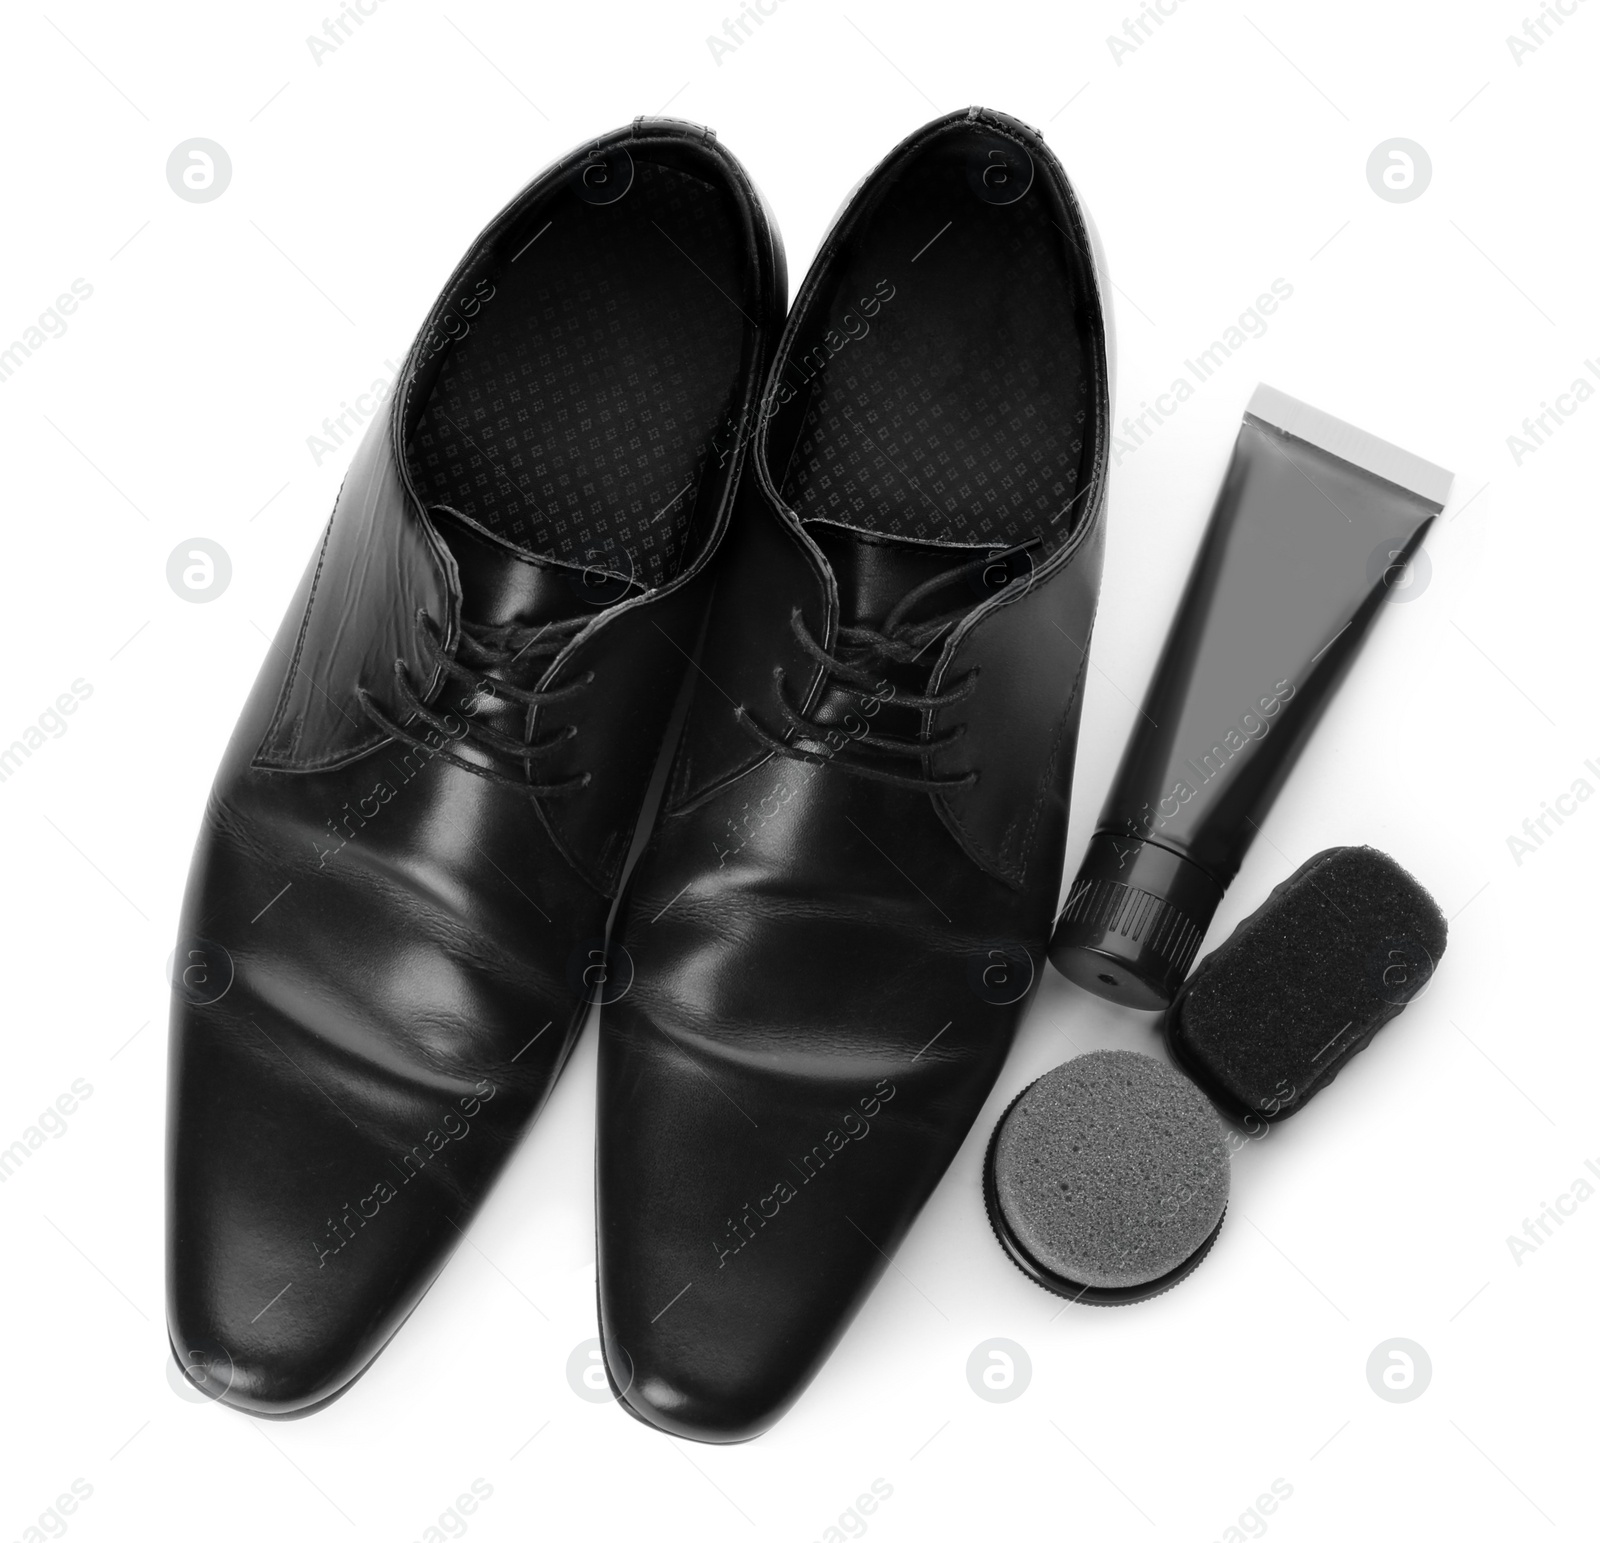 Photo of Stylish footwear and shoe care products on white background, top view